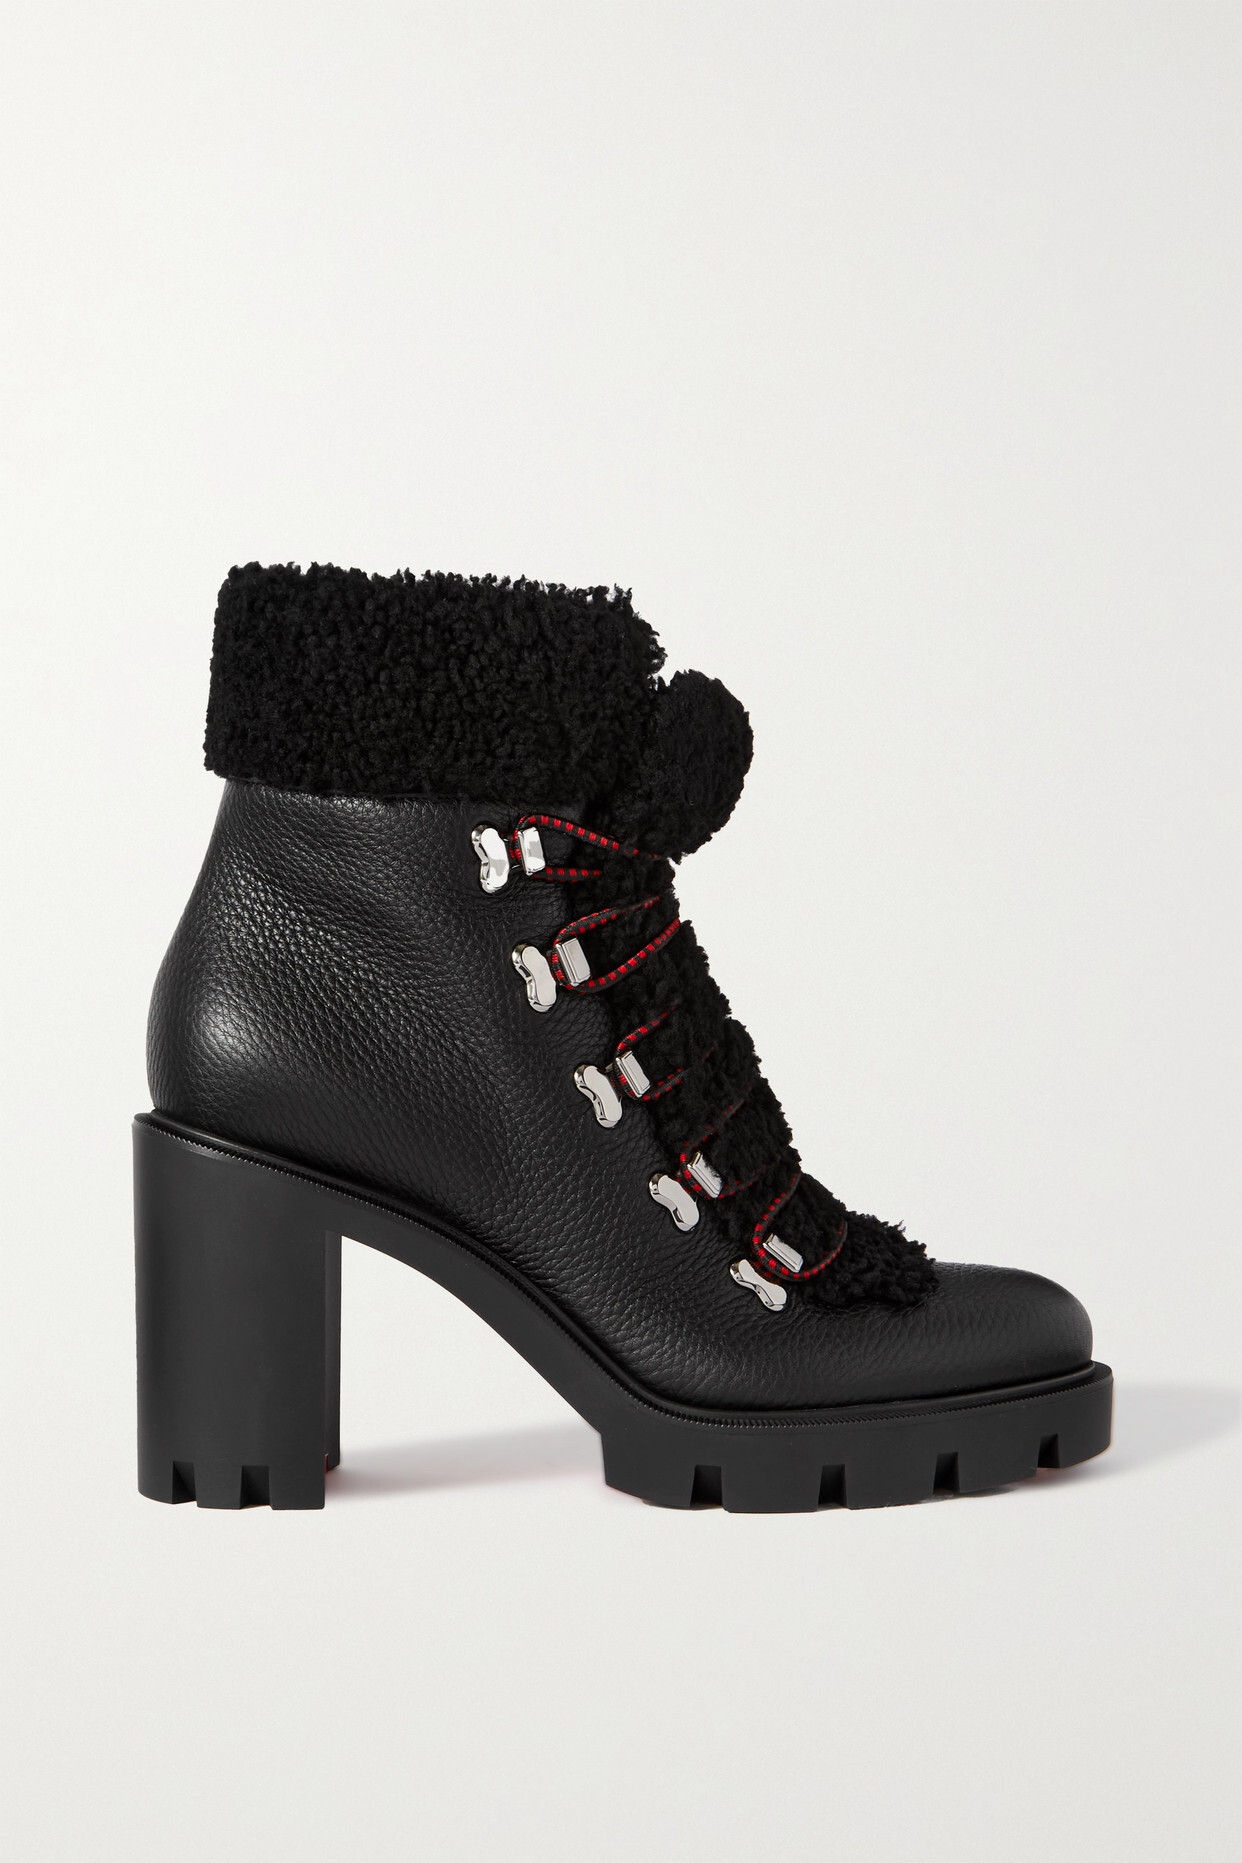 Christian Louboutin - Edelvizir 70 Shearling-trimmed Leather Ankle Boots - Black